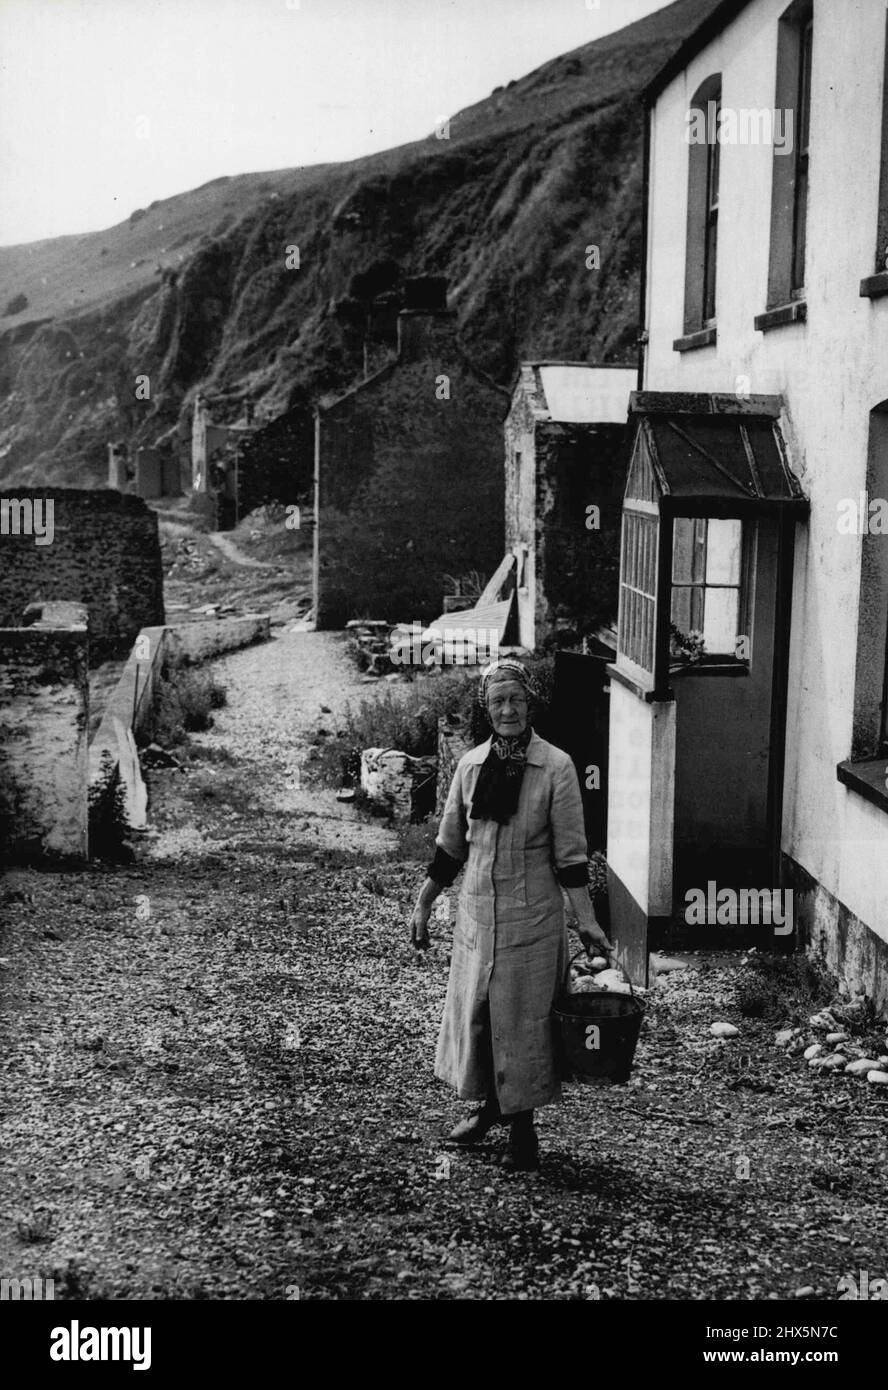 She Lives With Memories - In 'Ghost Village -- A tempest; of 38 years ago took everything out Her memories from Elizabeth Pretty John, a stout-hearted 70 - who is now the only inhabitant of the 'ghost village' of South Hallsands in South Devon. Here she stands outside her home. Before the storm struck in 1917, South Hallsands was a prosperous little fishing village. Afterwards, only Elizabeth and her brother were left, Now, the brother is dead and Elizabeth lives with her remembrances grave and gay. She has had an Invitation to live in London, but has refused because, she says, 'There is no Stock Photo